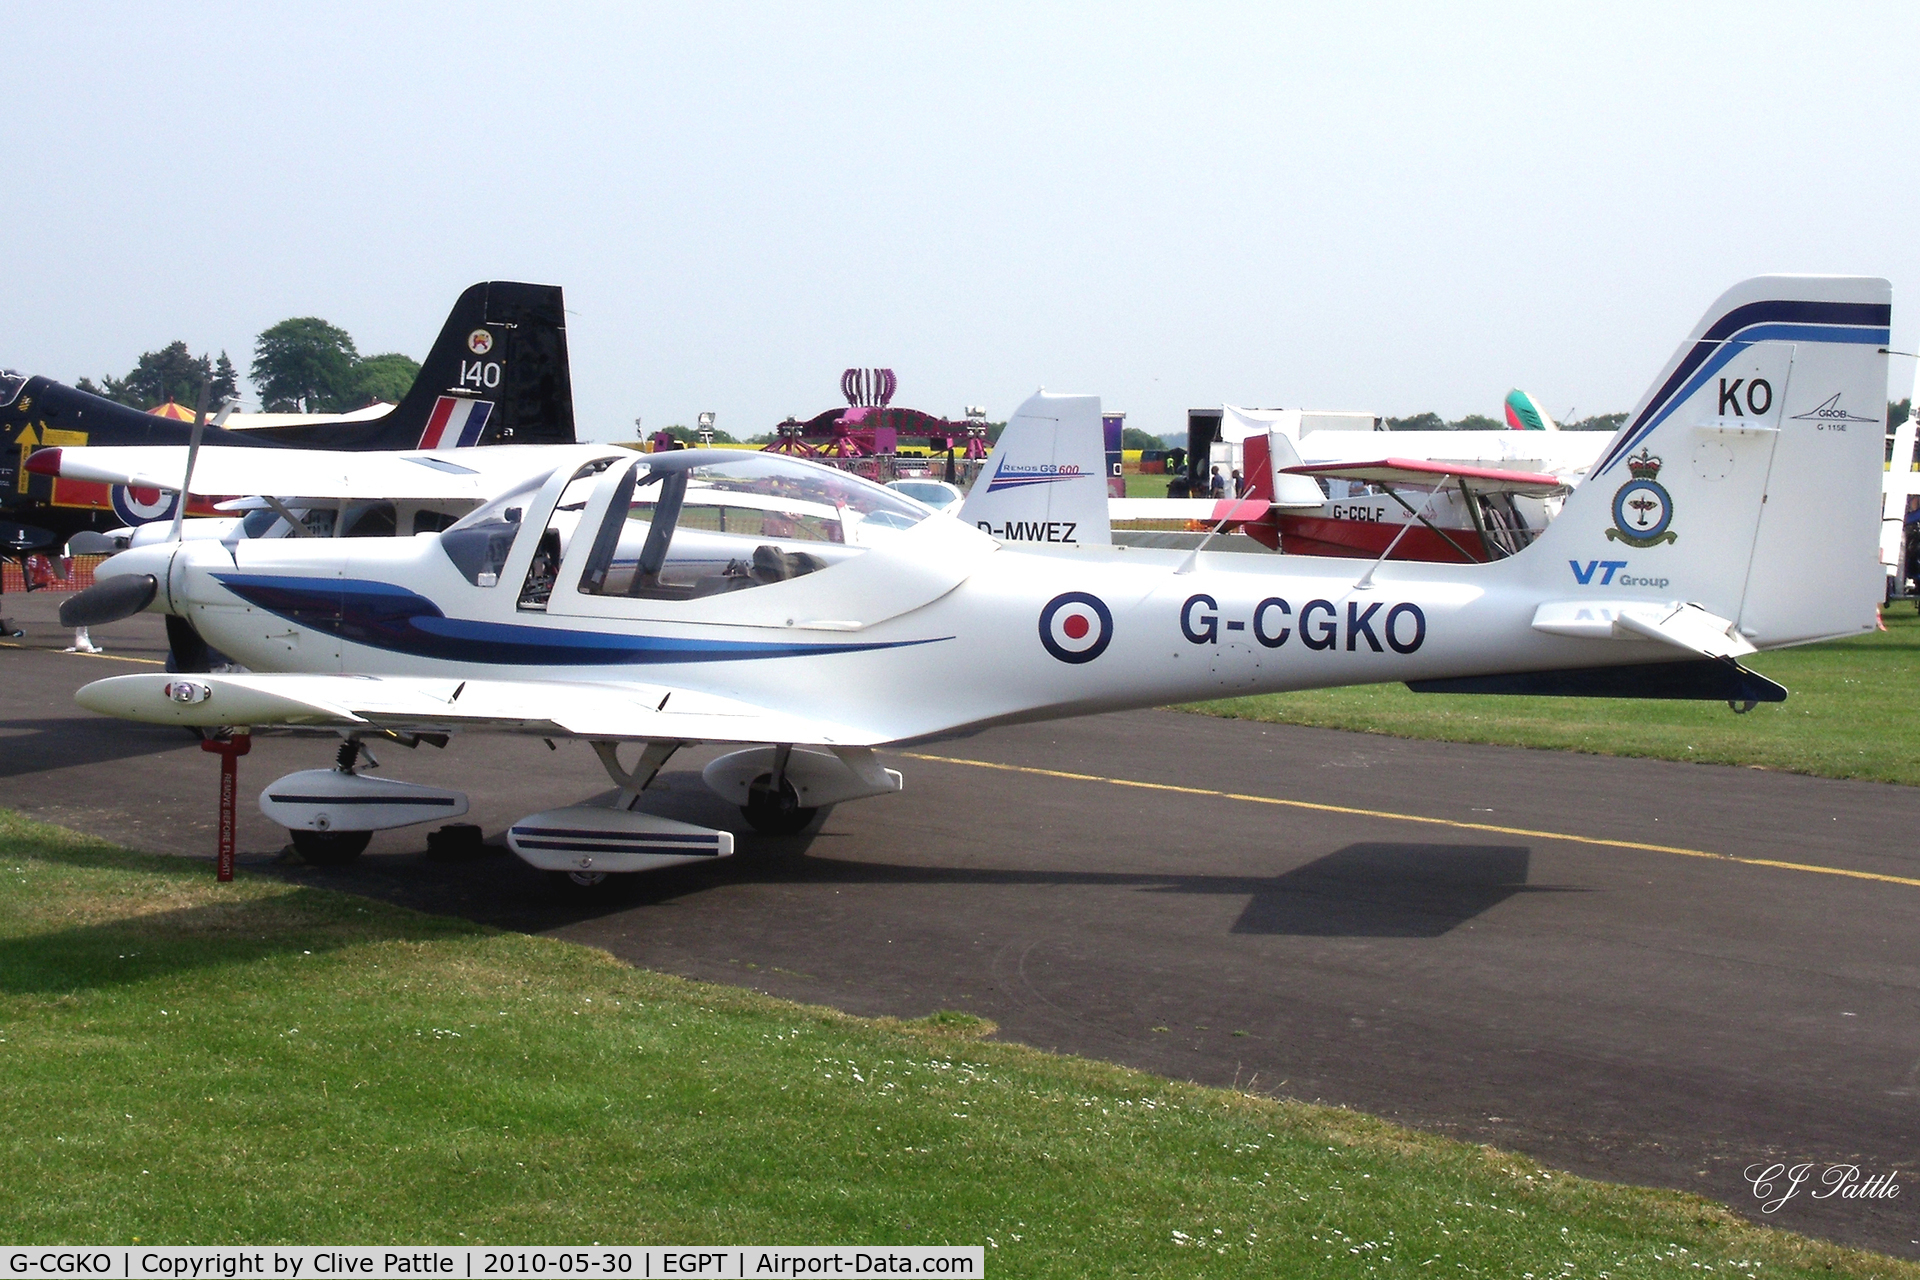 G-CGKO, 2009 Grob G-115E Tutor T1 C/N 82315/E, On display in the static park during the Heart of Scotland Airshow held at Perth (Scone) airfield EGPT